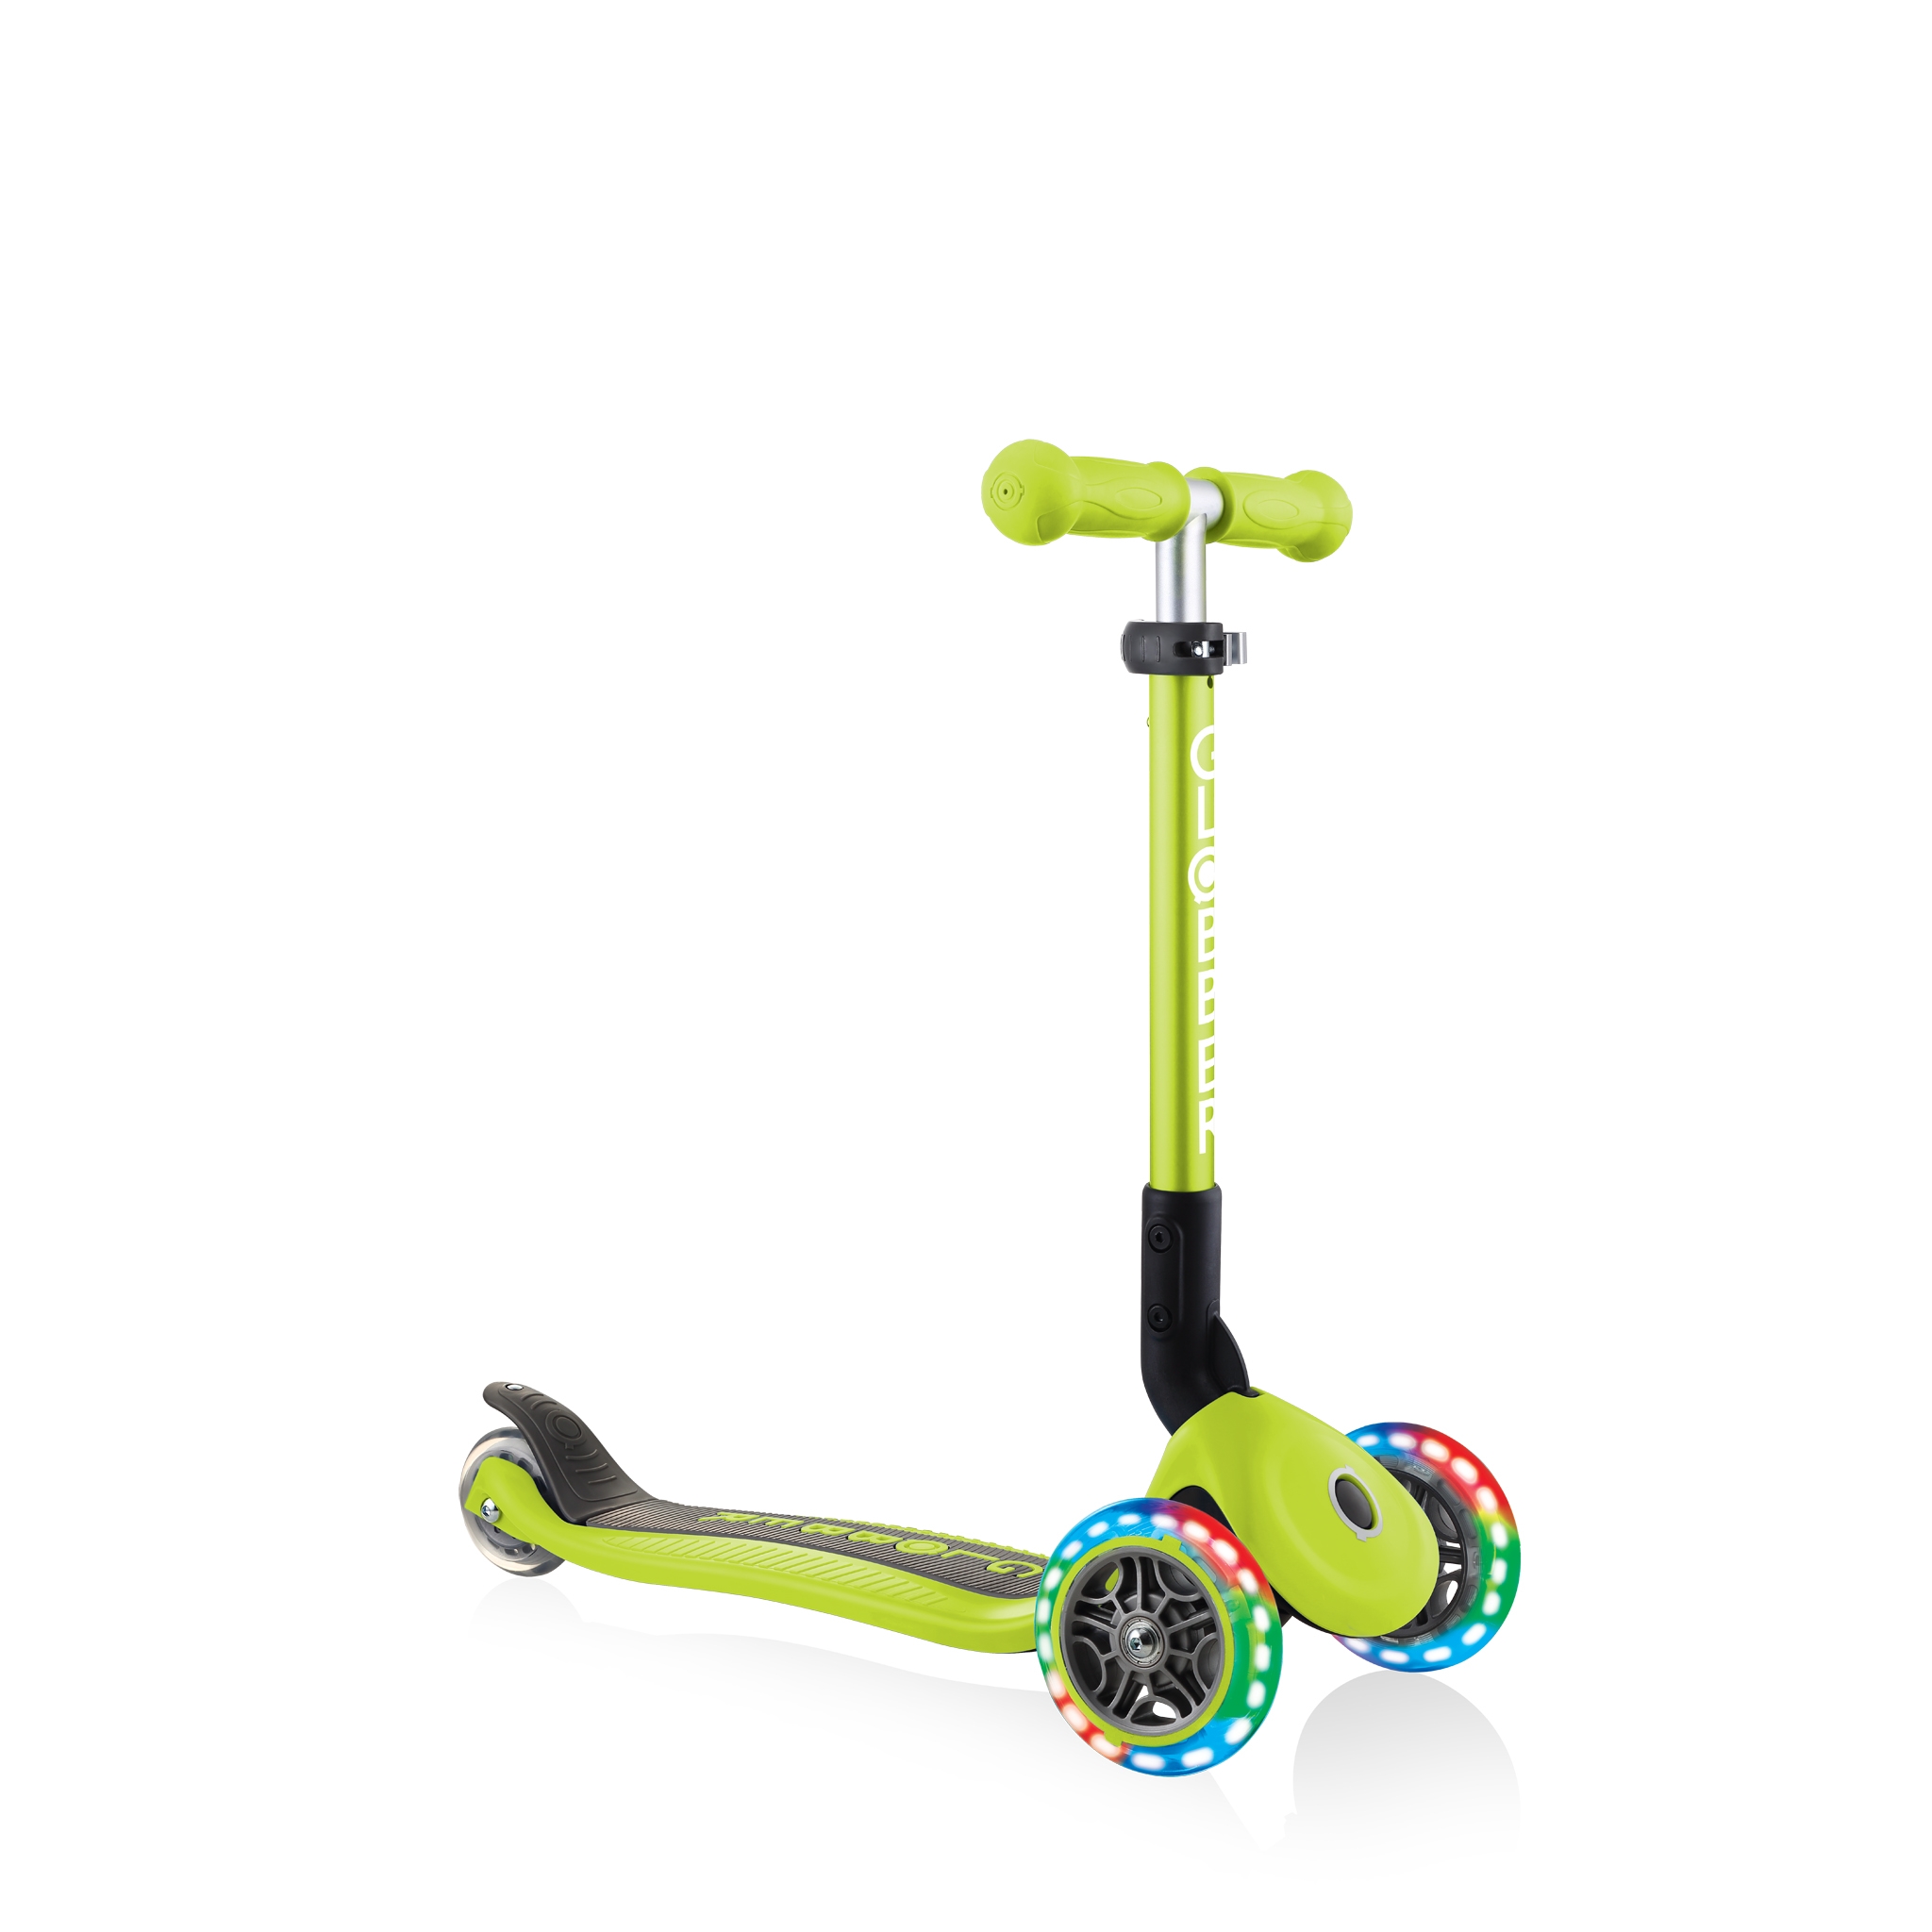 3-wheel-foldable-light-up-scooter-for-toddlers-aged-2-years-old-Globber-JUNIOR-FOLDABLE-LIGHTS 0